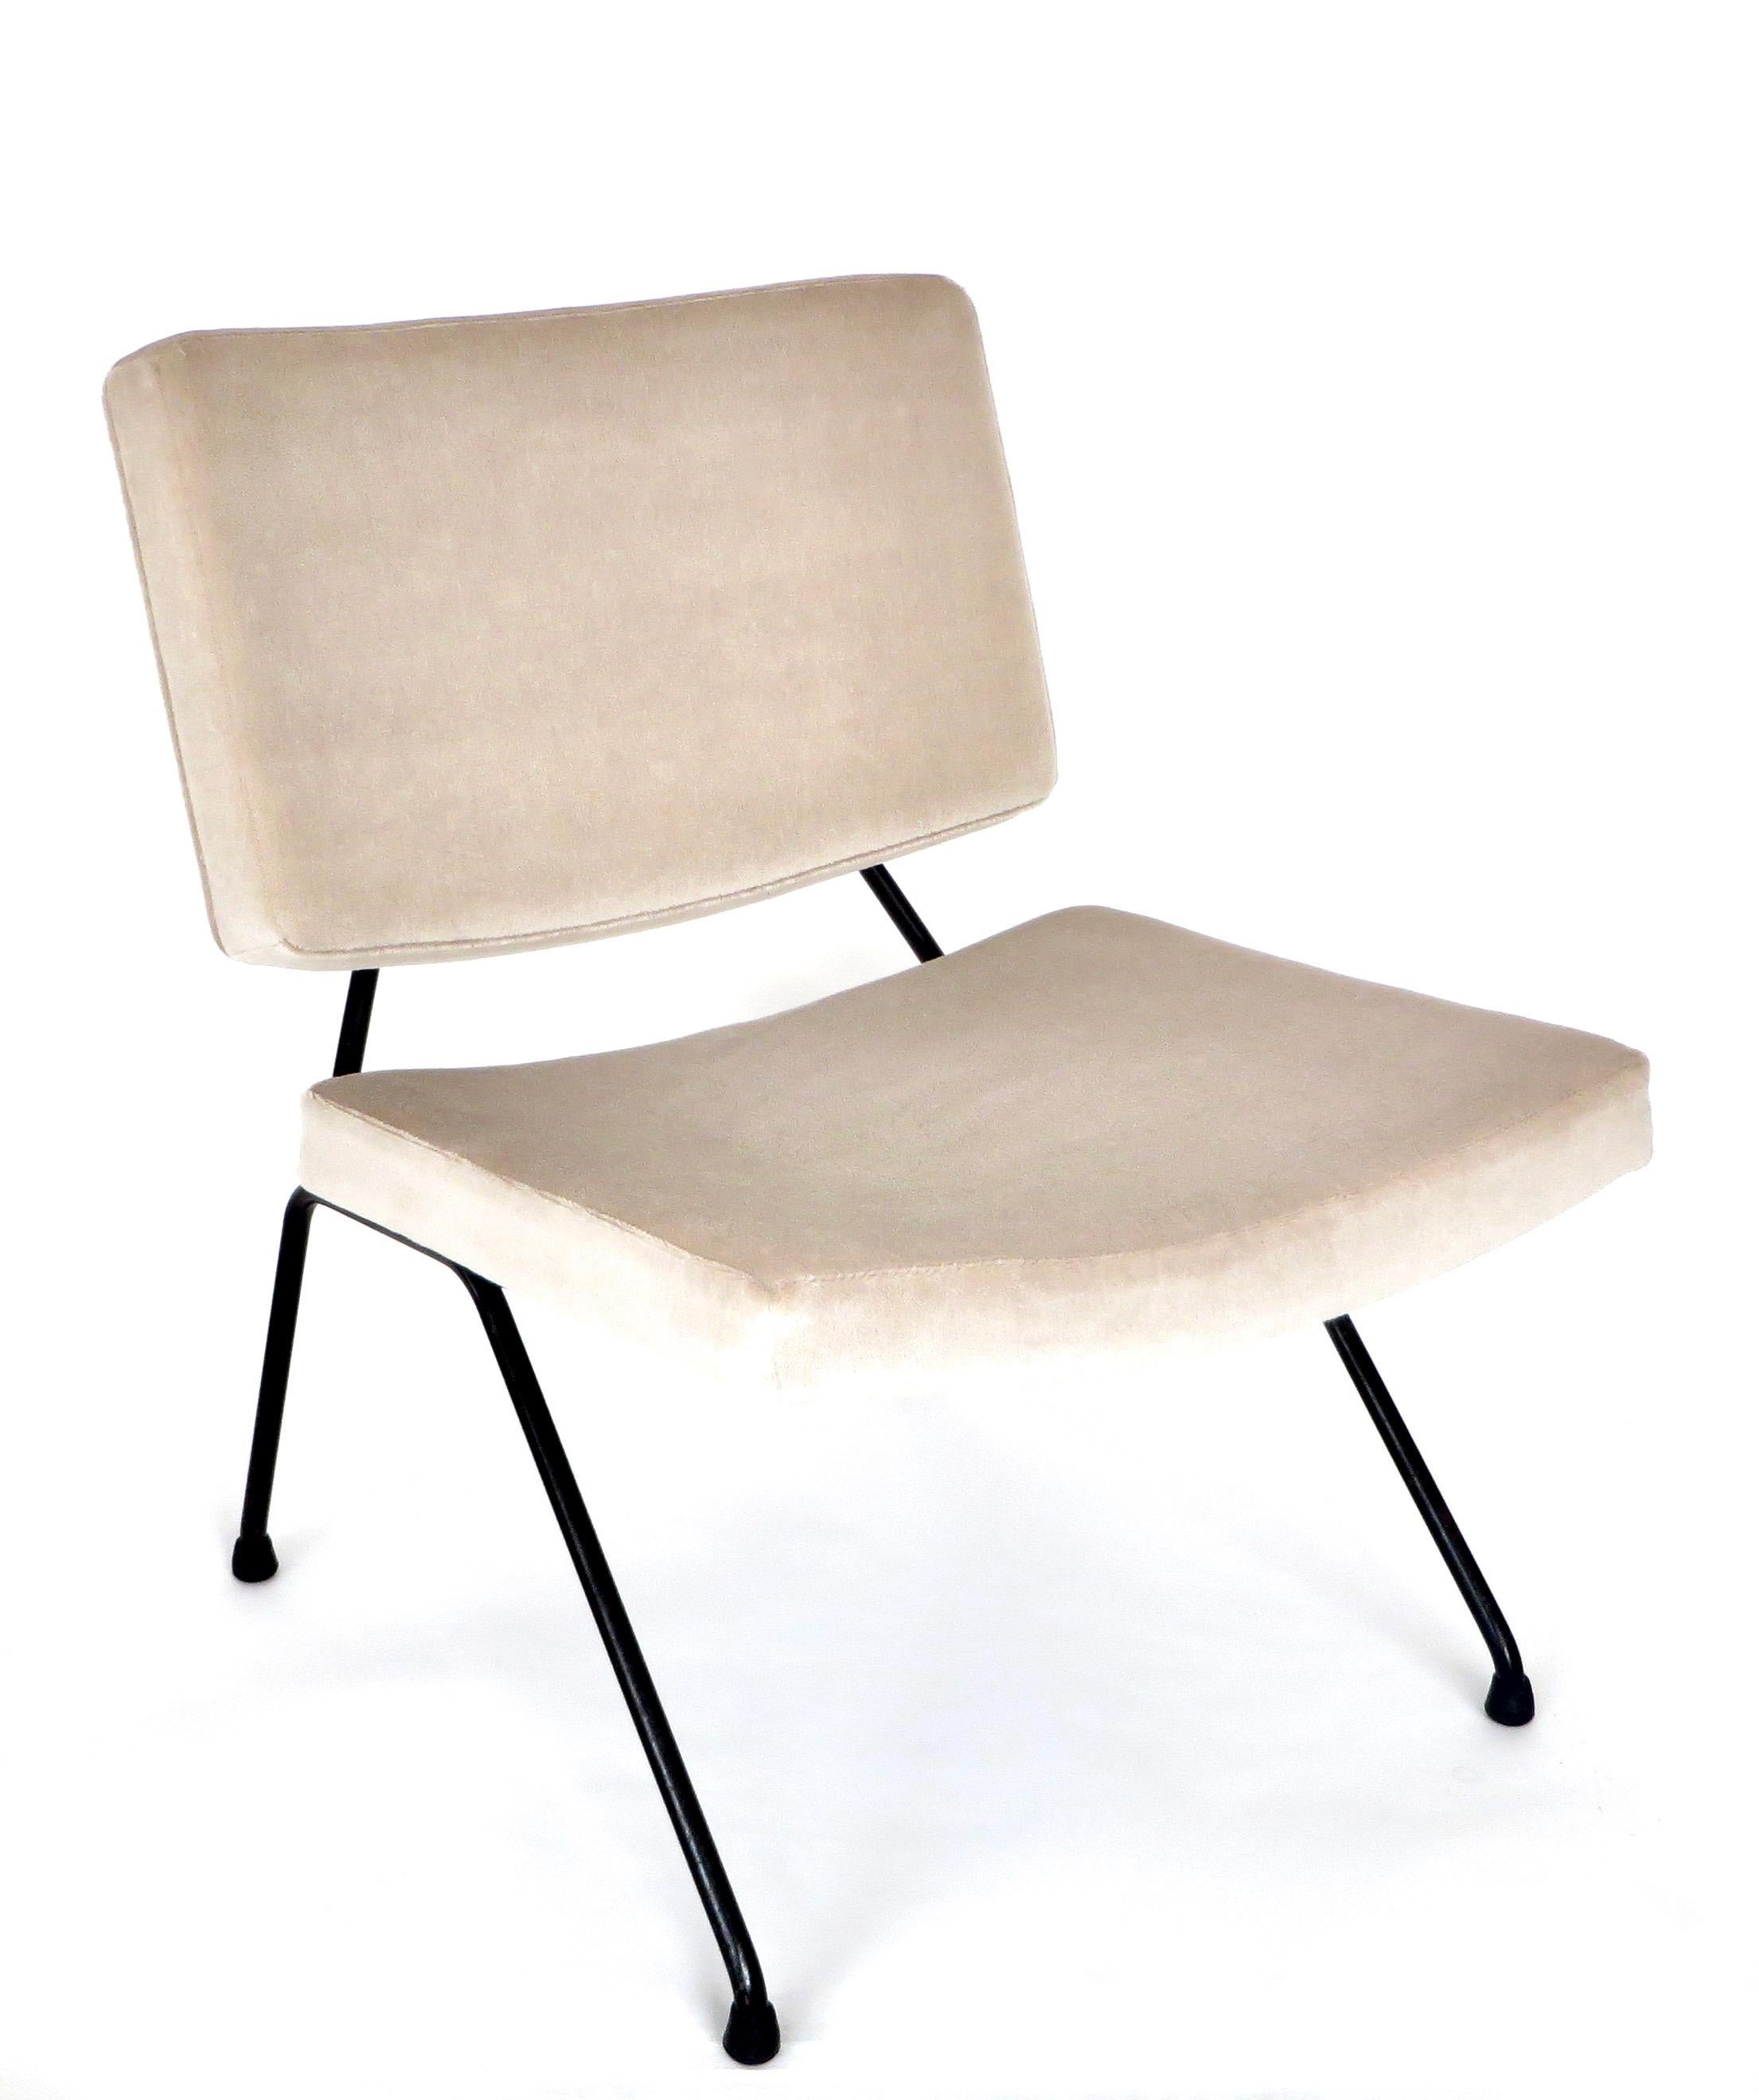 Pierre Paulin, the famous French designer, iconic lounge chairs from the fifties, this model CM190 was edited by Thonet. 
It is composed of a back and seat covered with a pale champagne blush color mohair resting on a black tubular metal structure